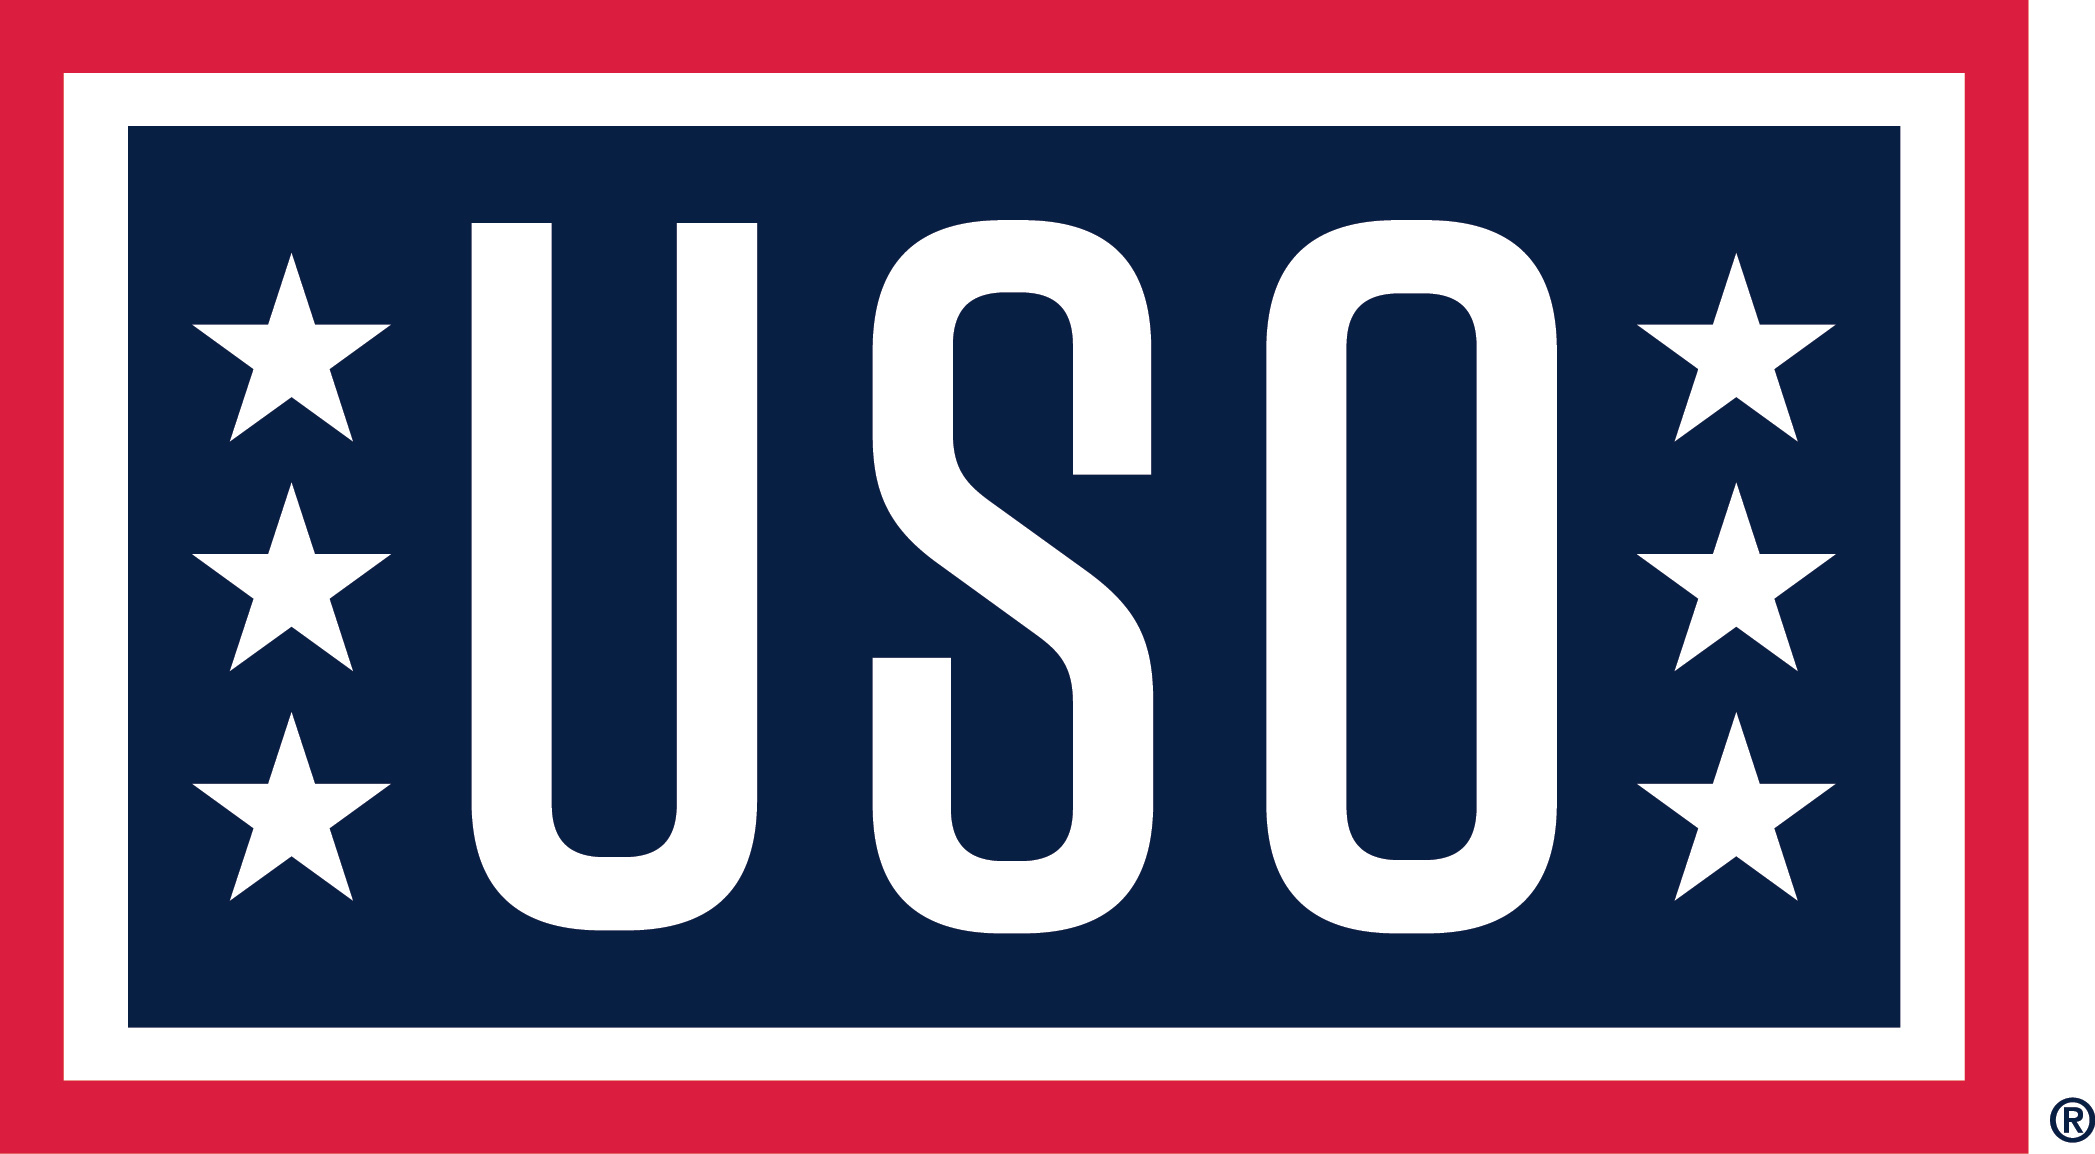 Guaranteed Rate has announced a partnership with the United Service Organizations (USO)